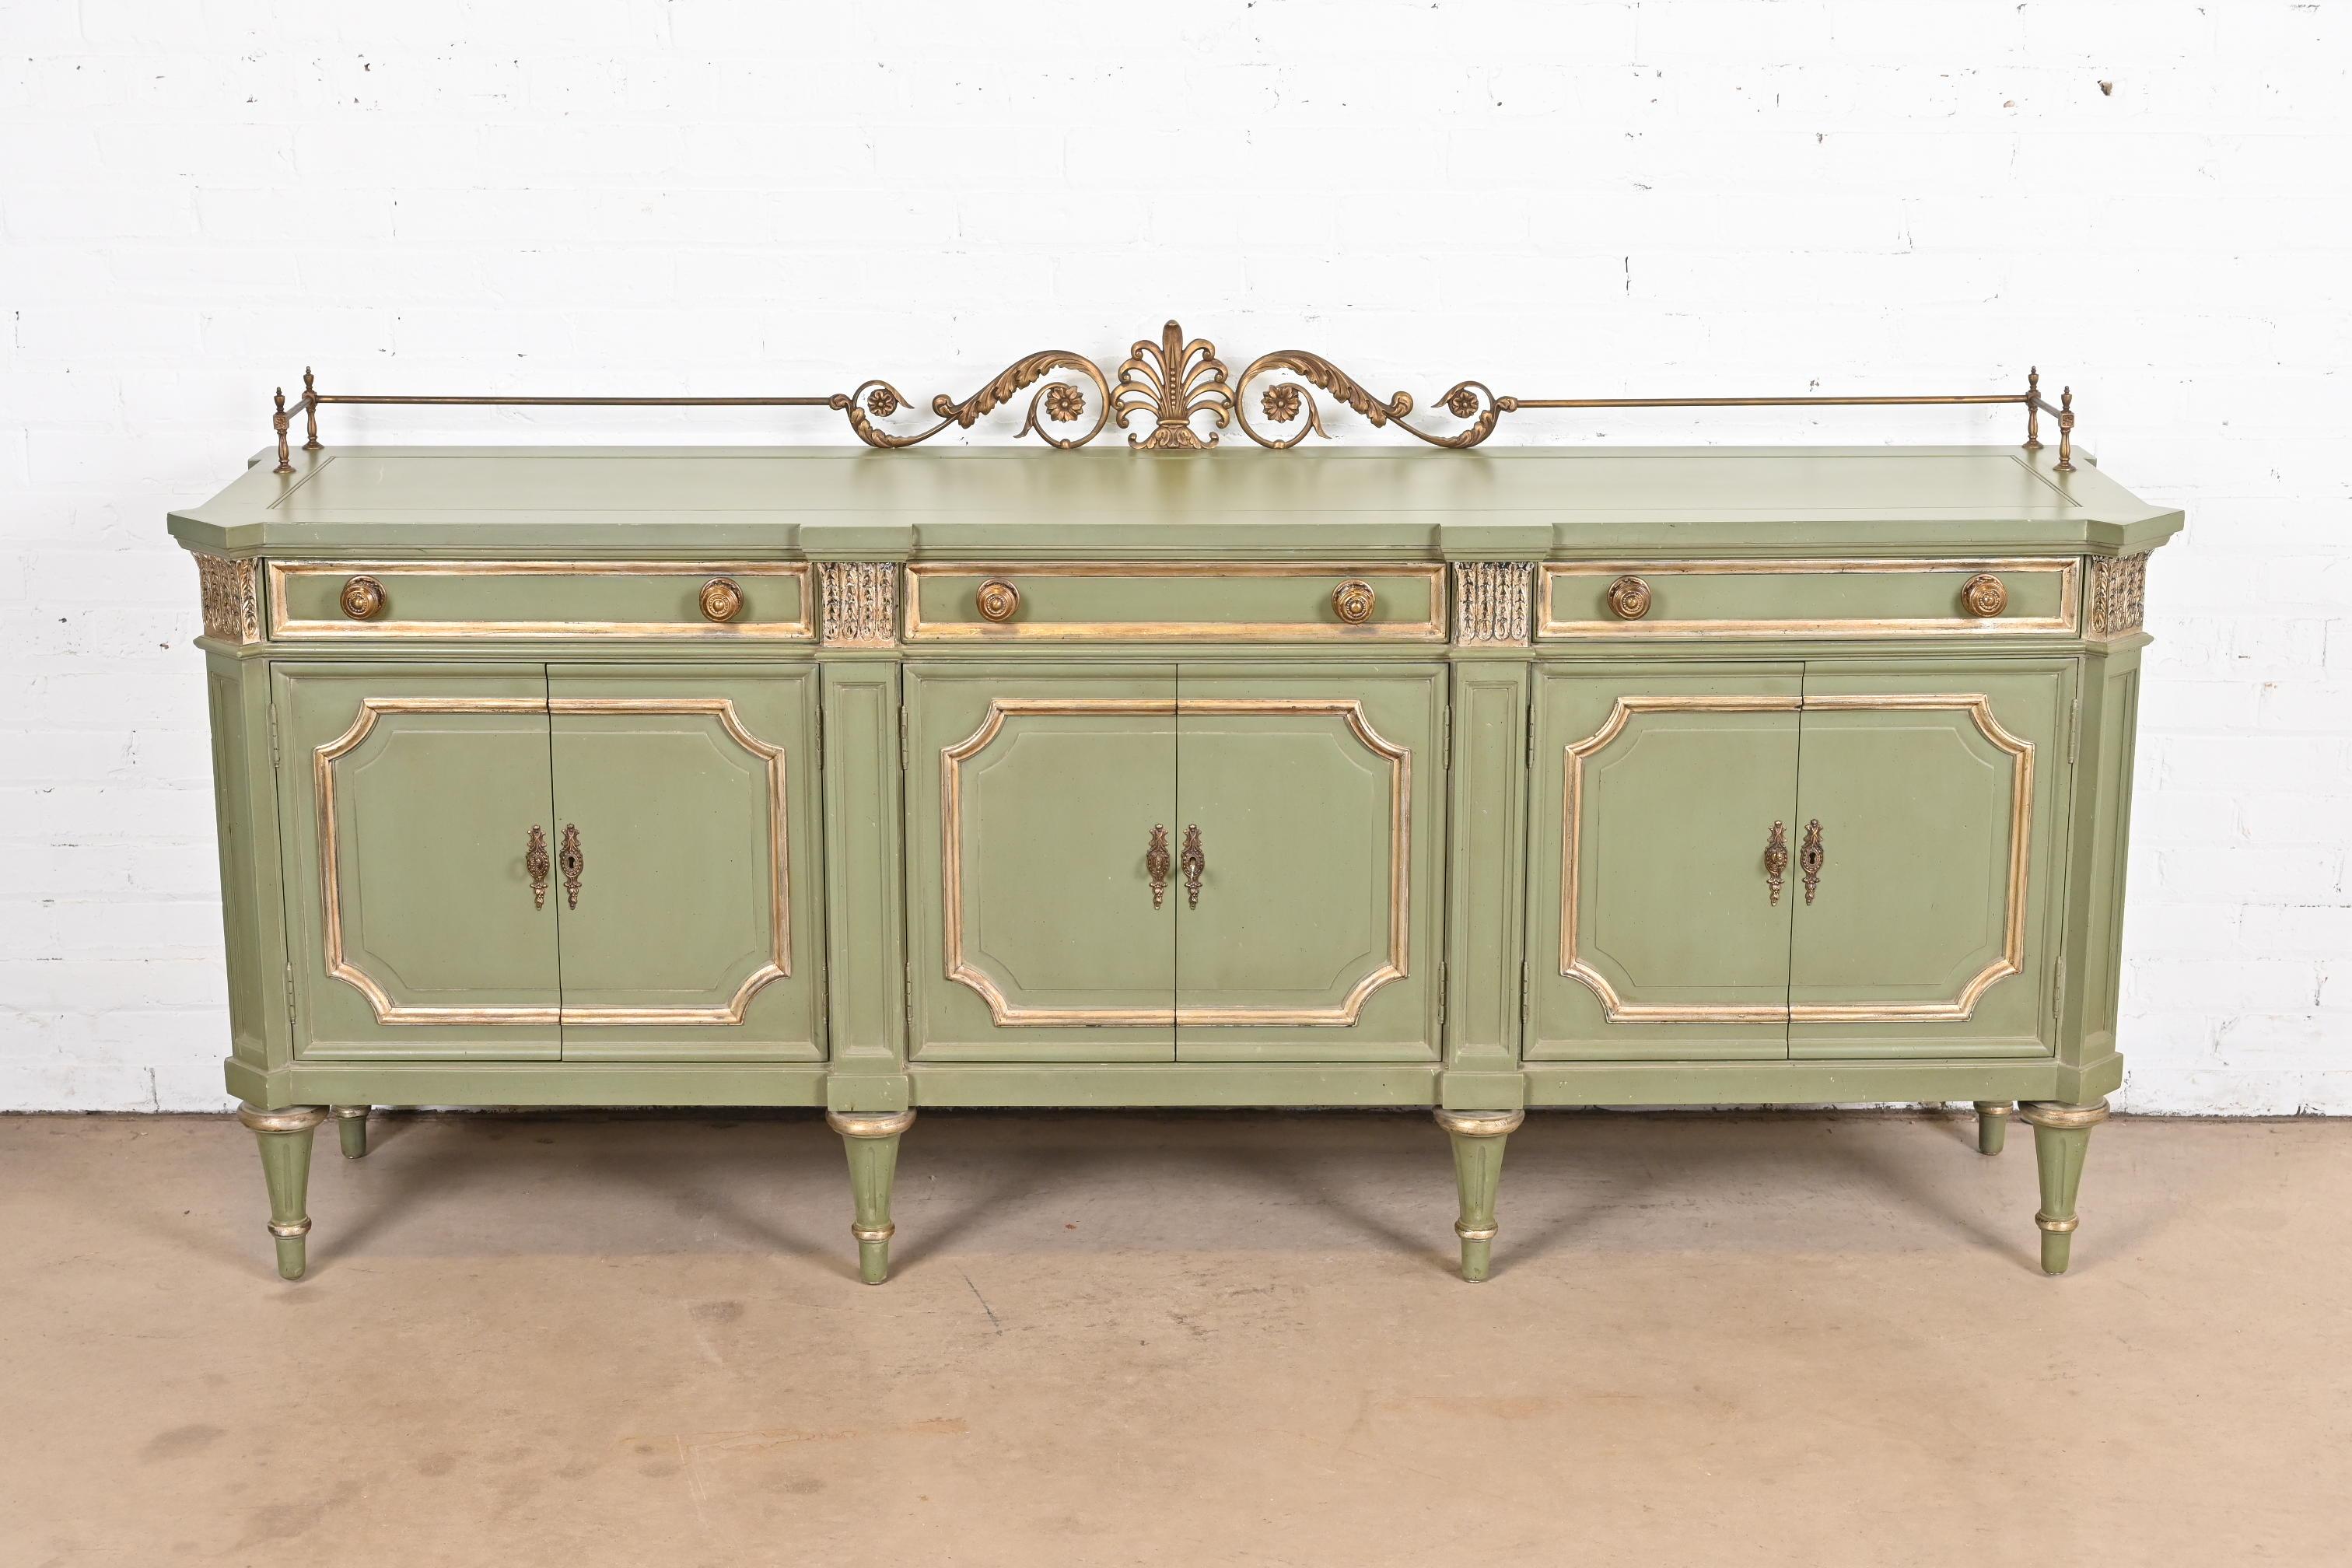 A gorgeous French Regency Louis XVI style sideboard, credenza, or bar cabinet

By Karges

USA, Circa 1960s

Green lacquered walnut, with gold gilt accents, and original brass hardware and gallery.

Measures: 80